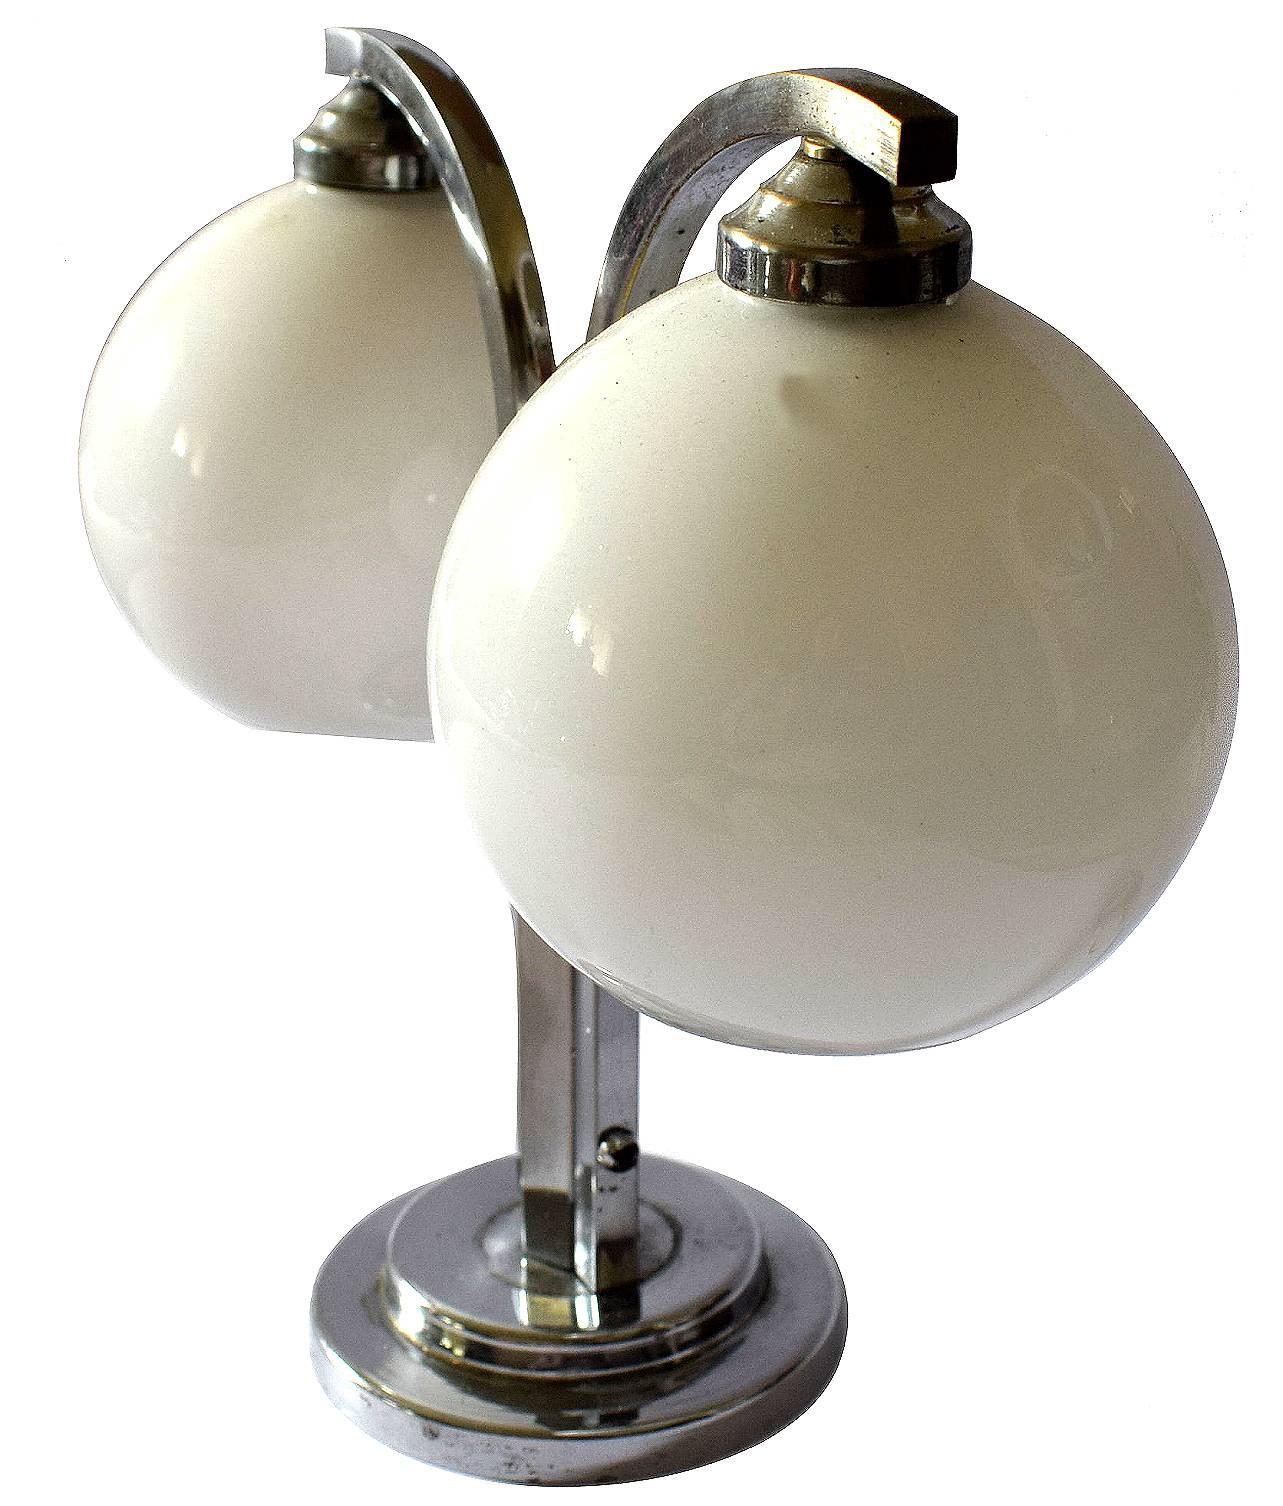 Originating from France is this very stylish 1930s Art Deco Modernist table lamp. Looks as equally attractive switched on or off. Features a chrome circular stepped base with central chrome column. Condition is very good with just normal expected